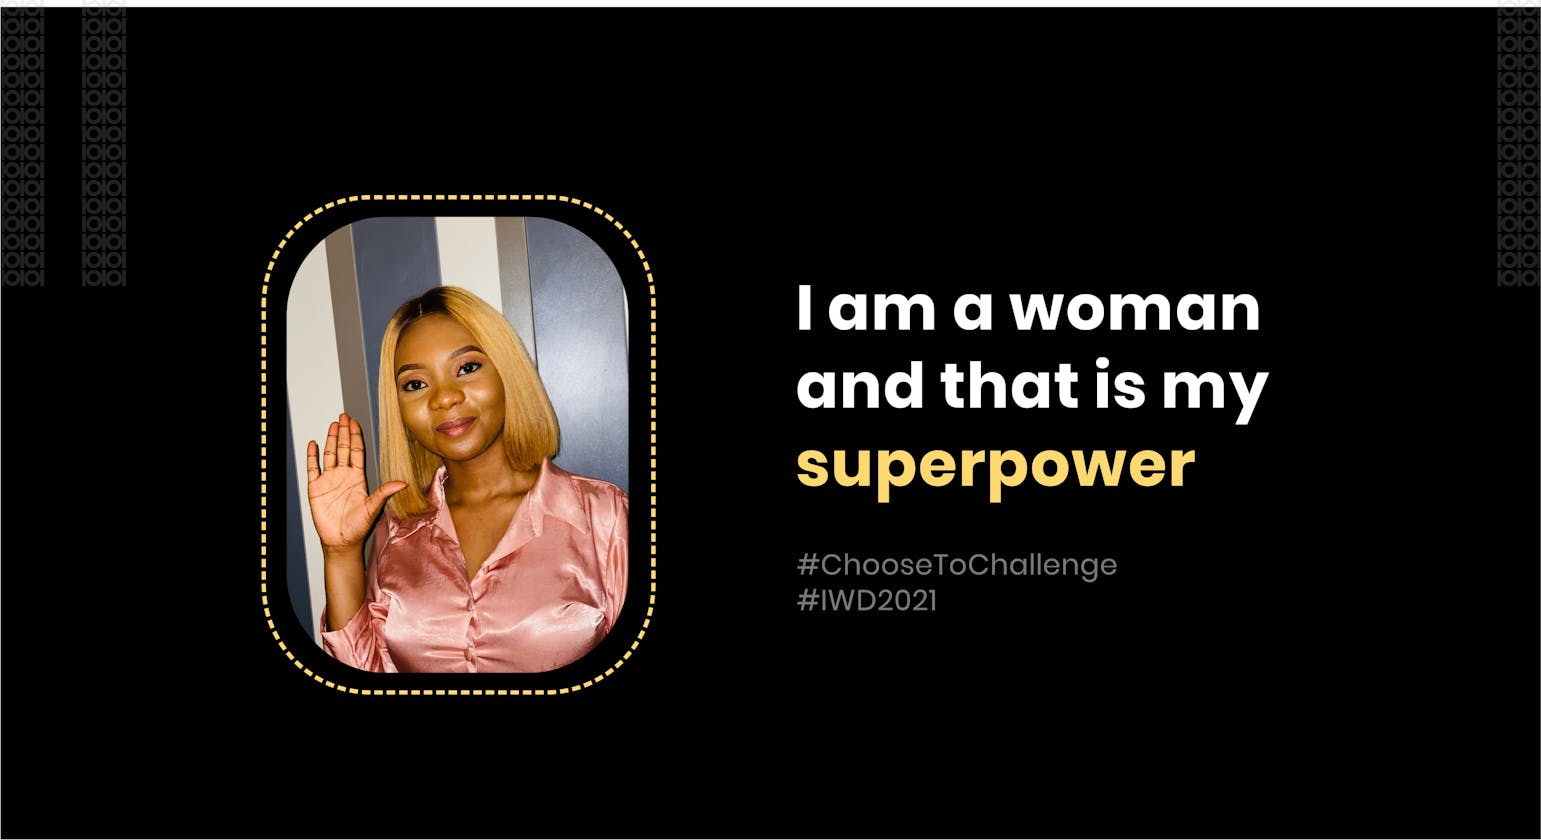 I am a woman, and that is my superpower